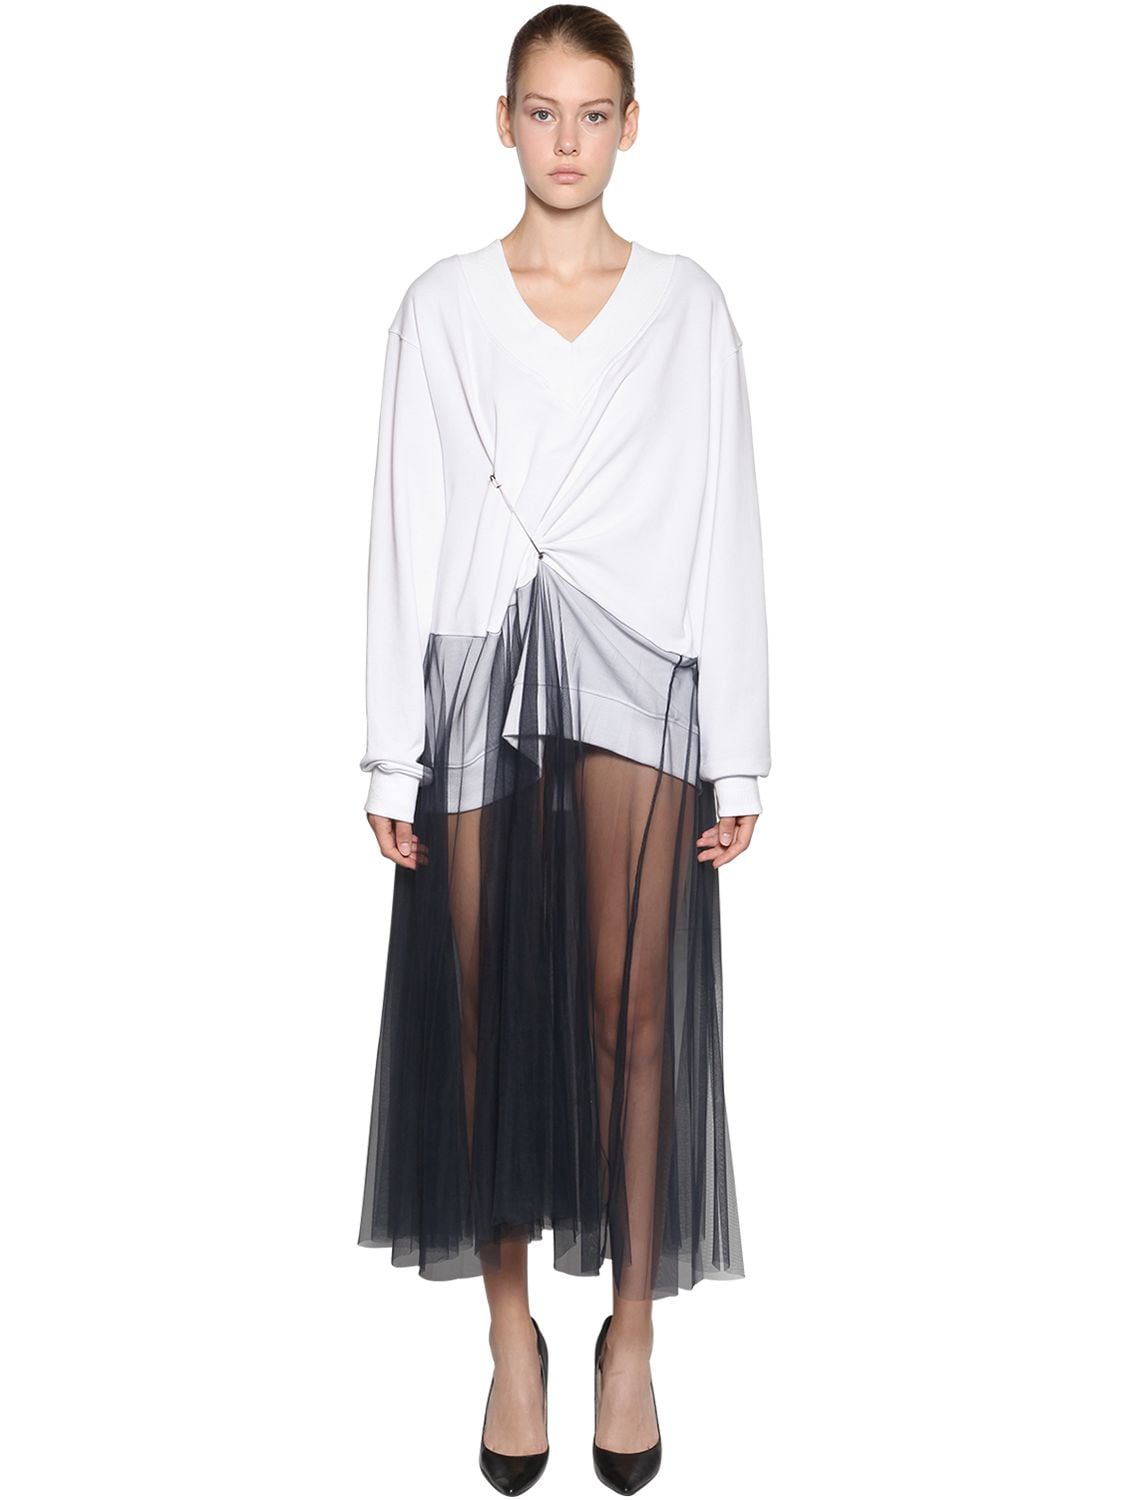 Act N°1 Cotton Sweater W/ Tulle Skirt Dress In White,black